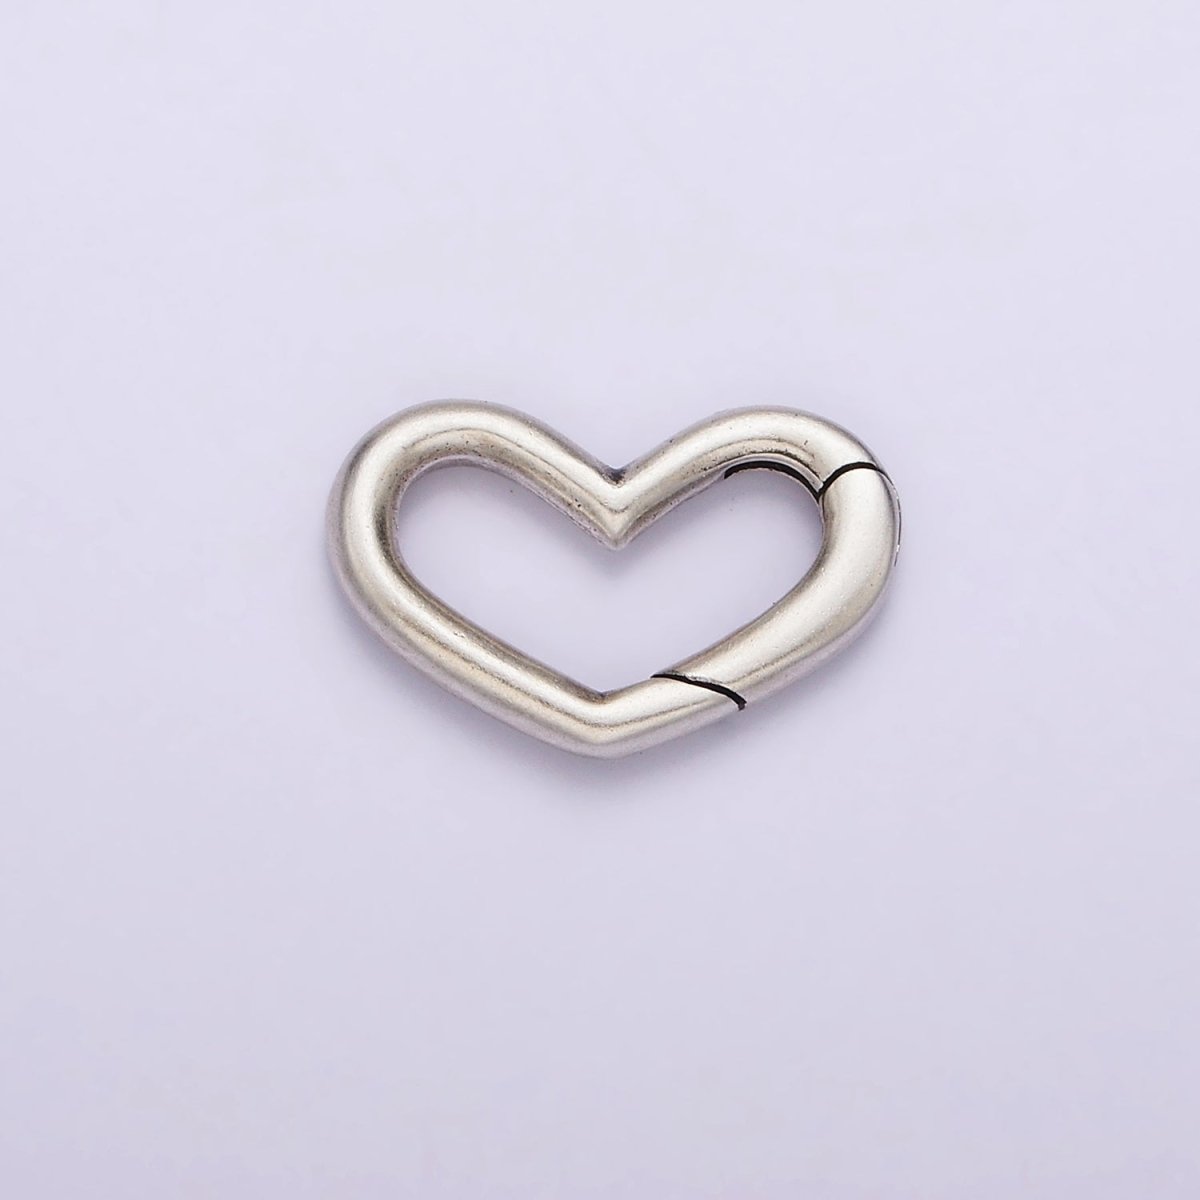 S925 Sterling Silver Hinged Heart Push Gate Ring Clasp Charm Pendants Interchangeable Connectors SL-307 - DLUXCA